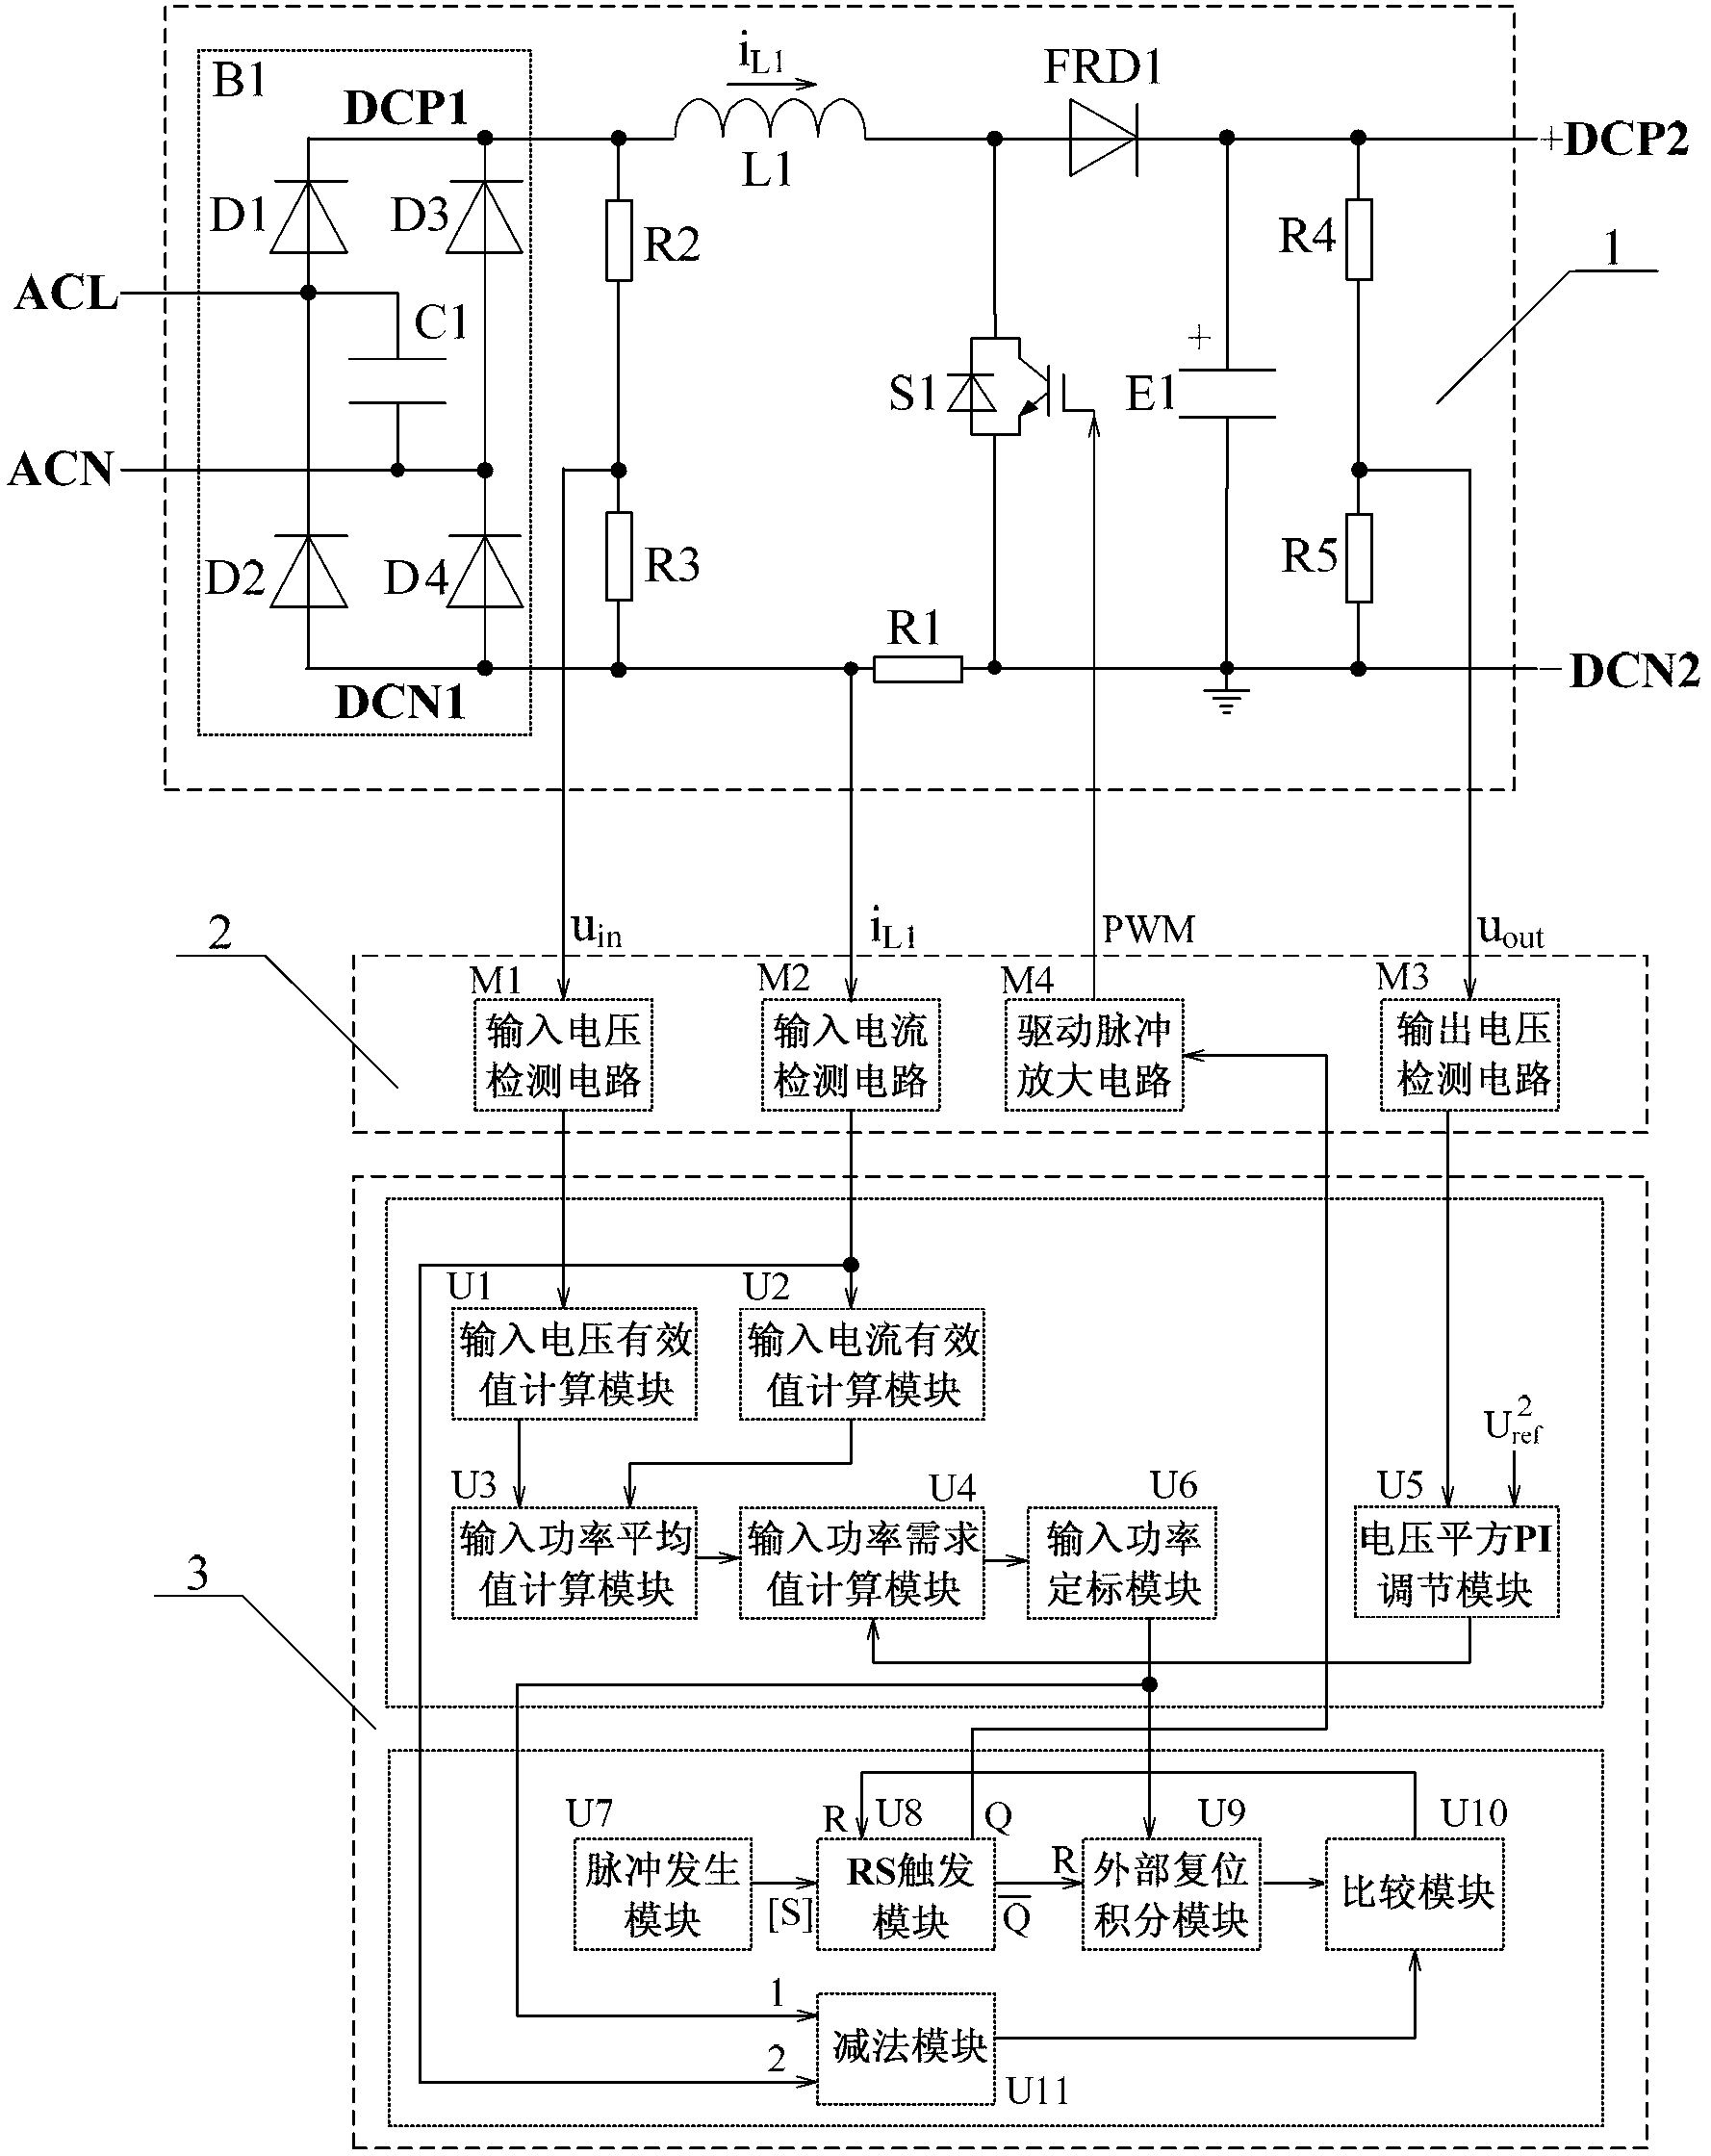 Single-phase power factor corrector in direct network-side power control